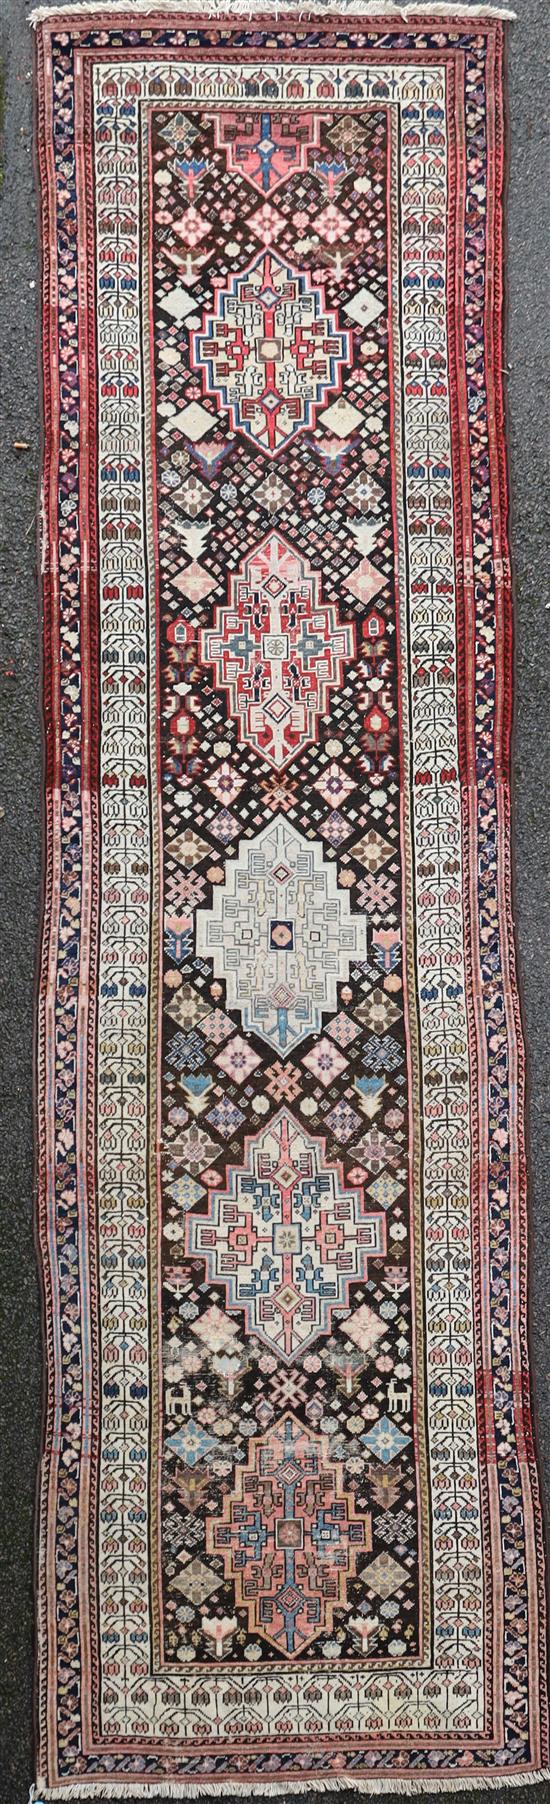 A Persian ivory ground runner, 13ft 2in by 4ft 4in.